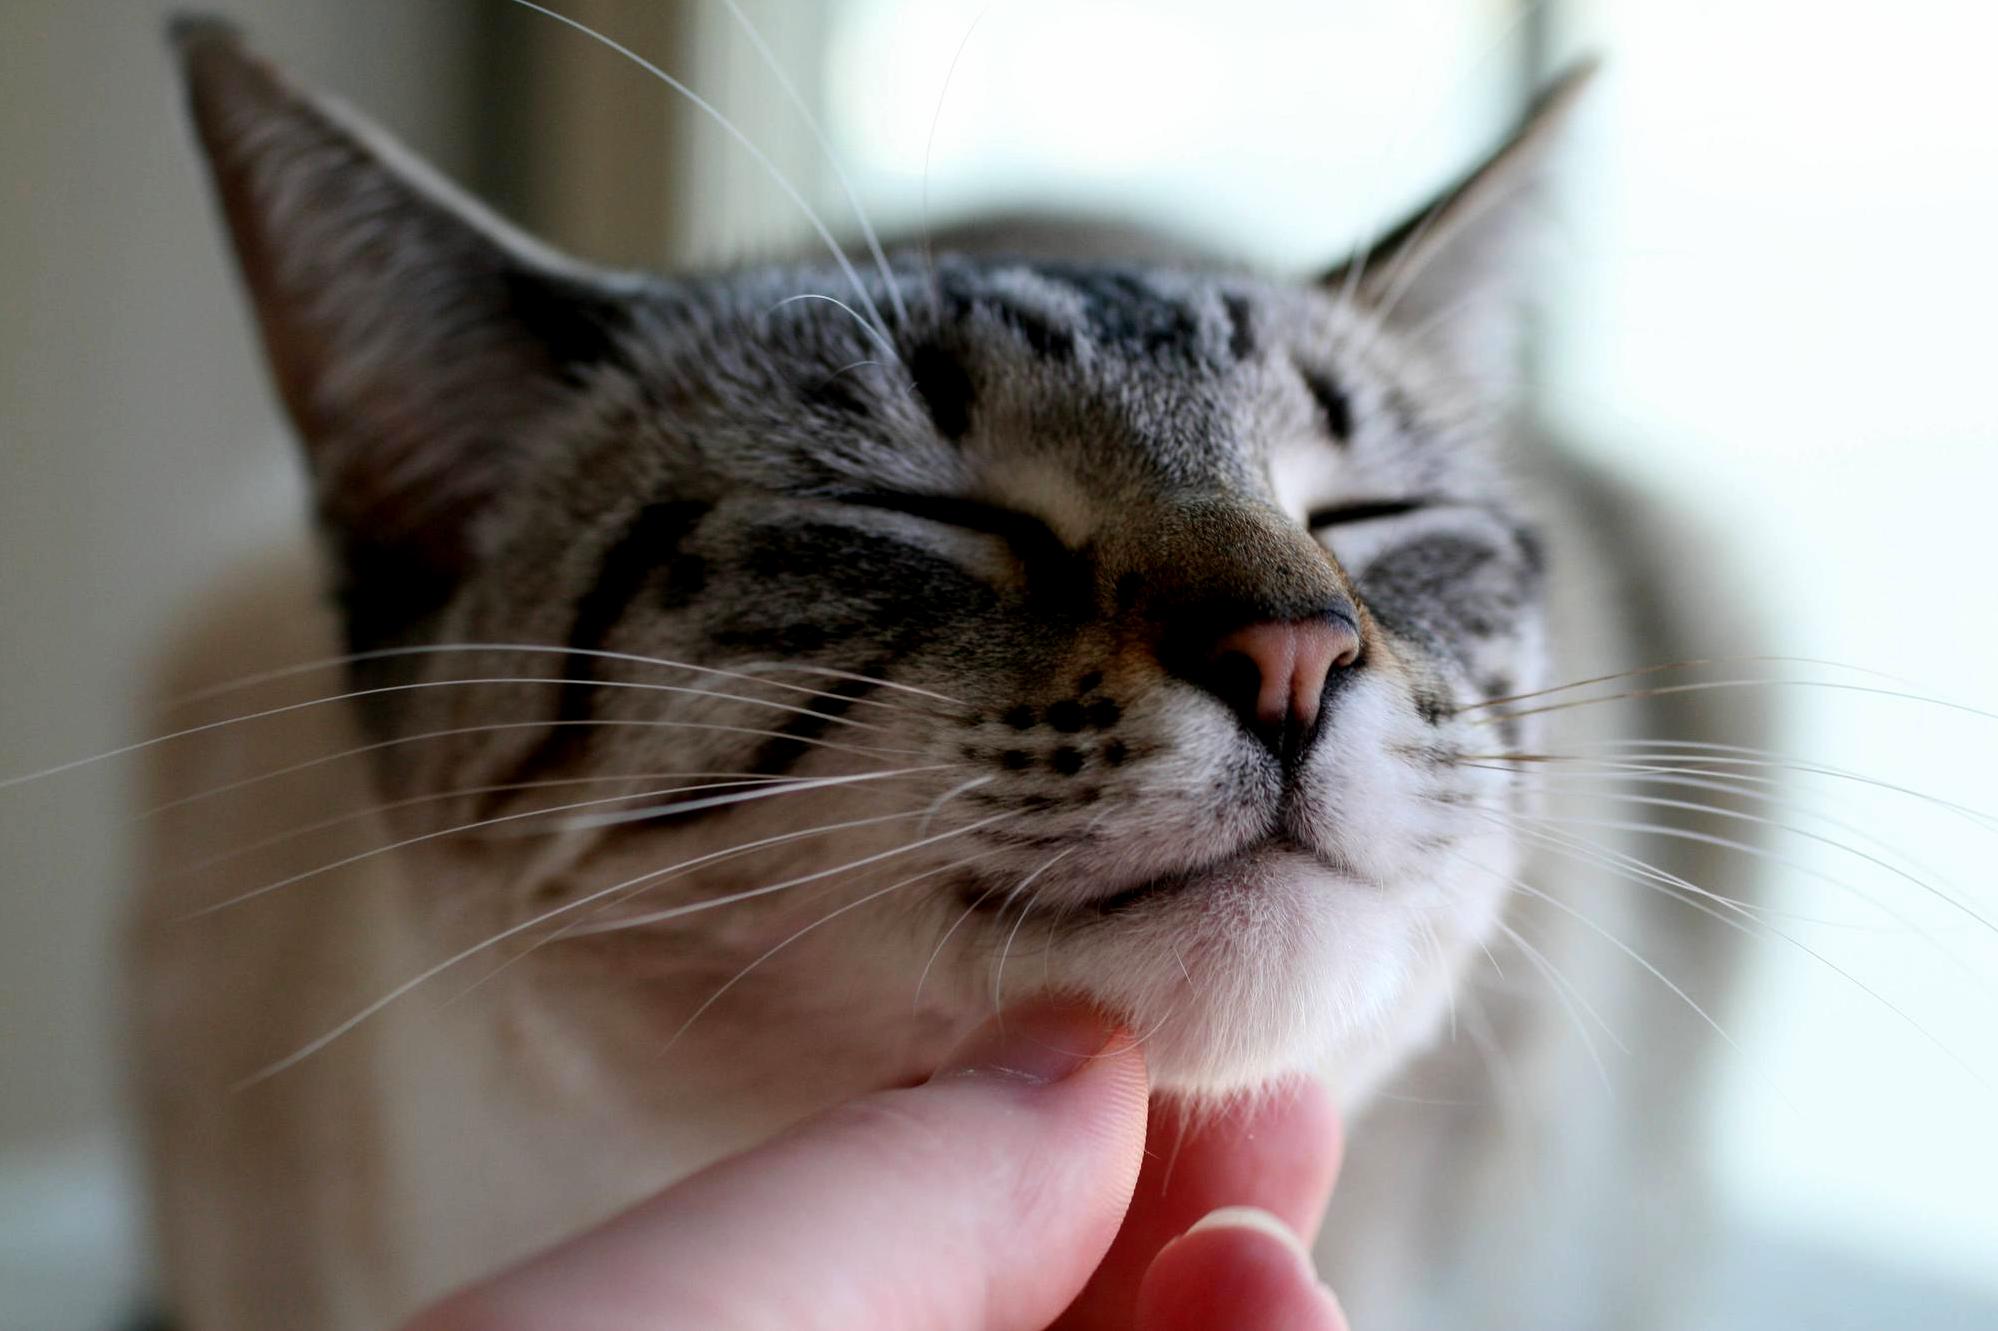 Nothing makes lyra purr like a good chin scratch.